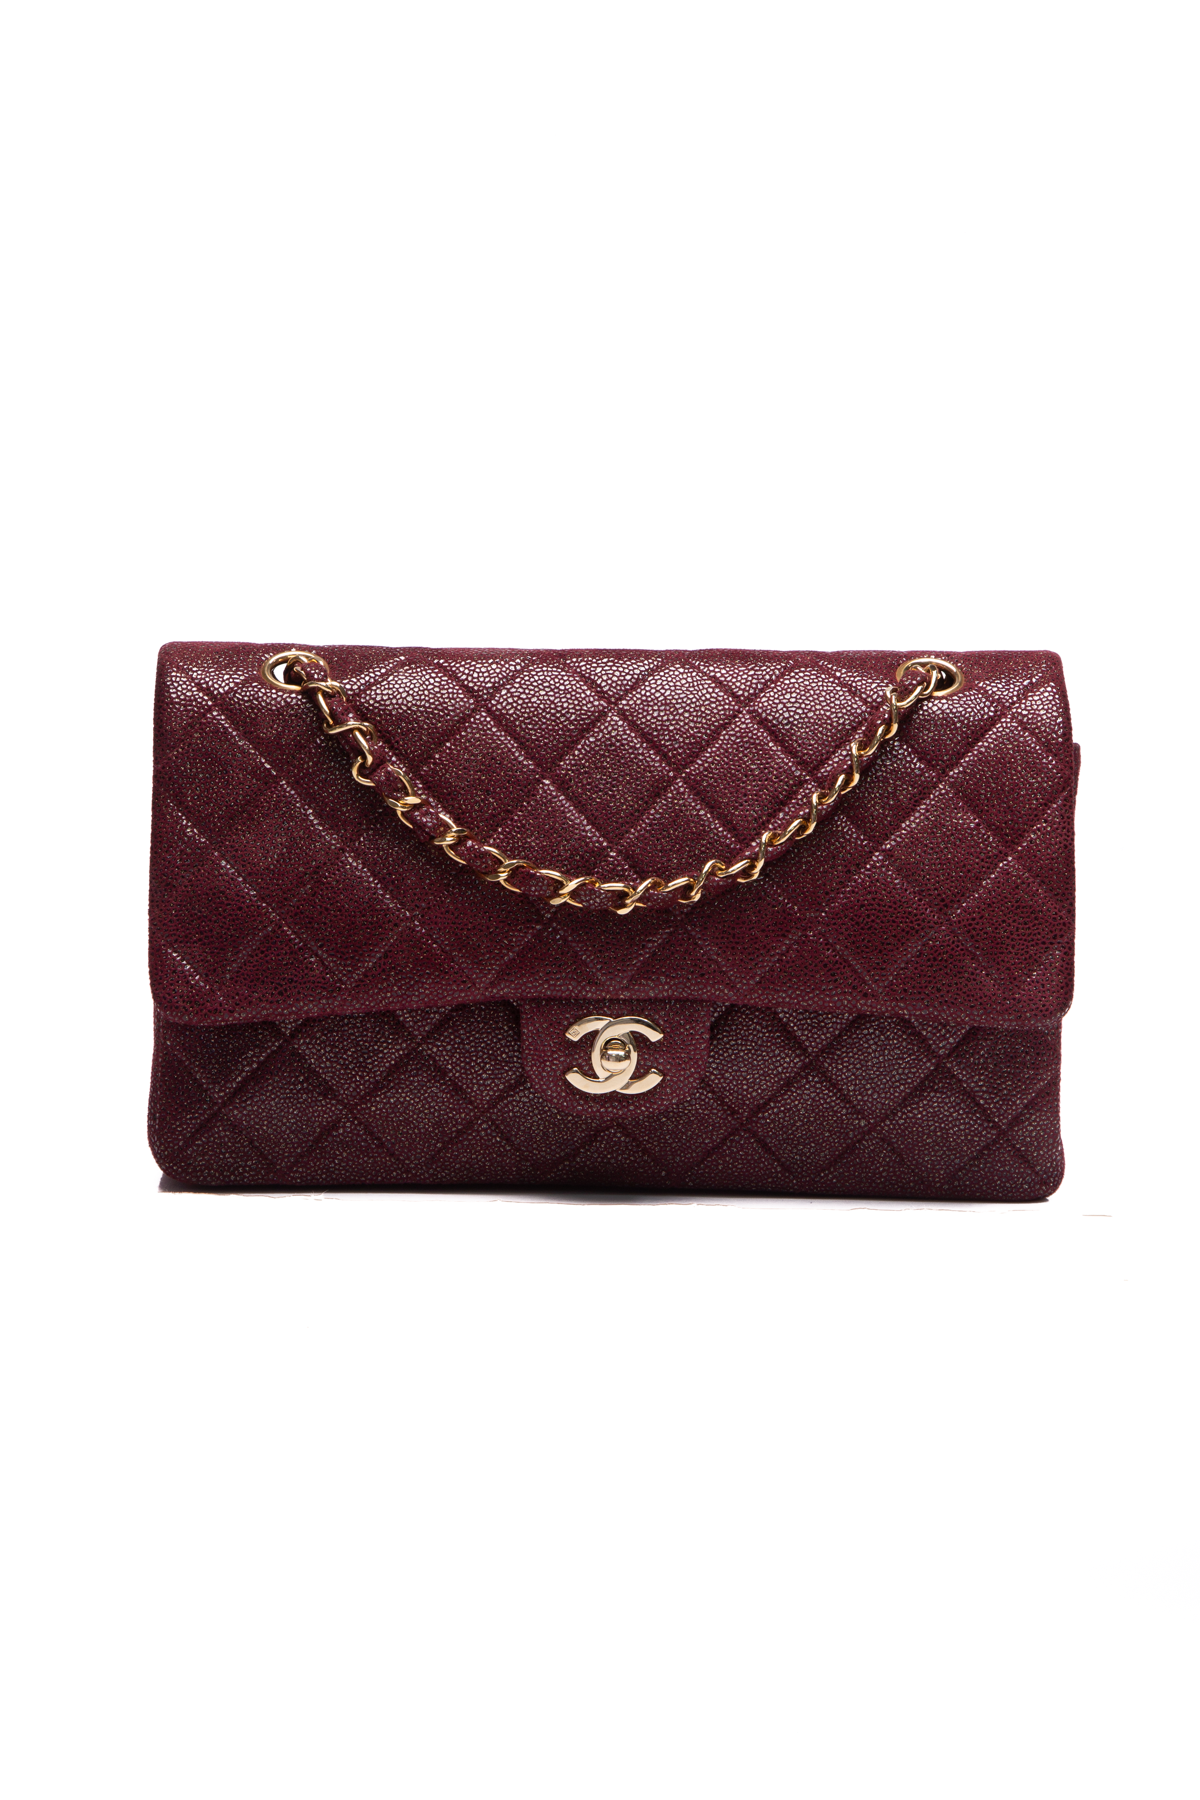 Chanel Classic Medium Double Flap Bag - Couture USA